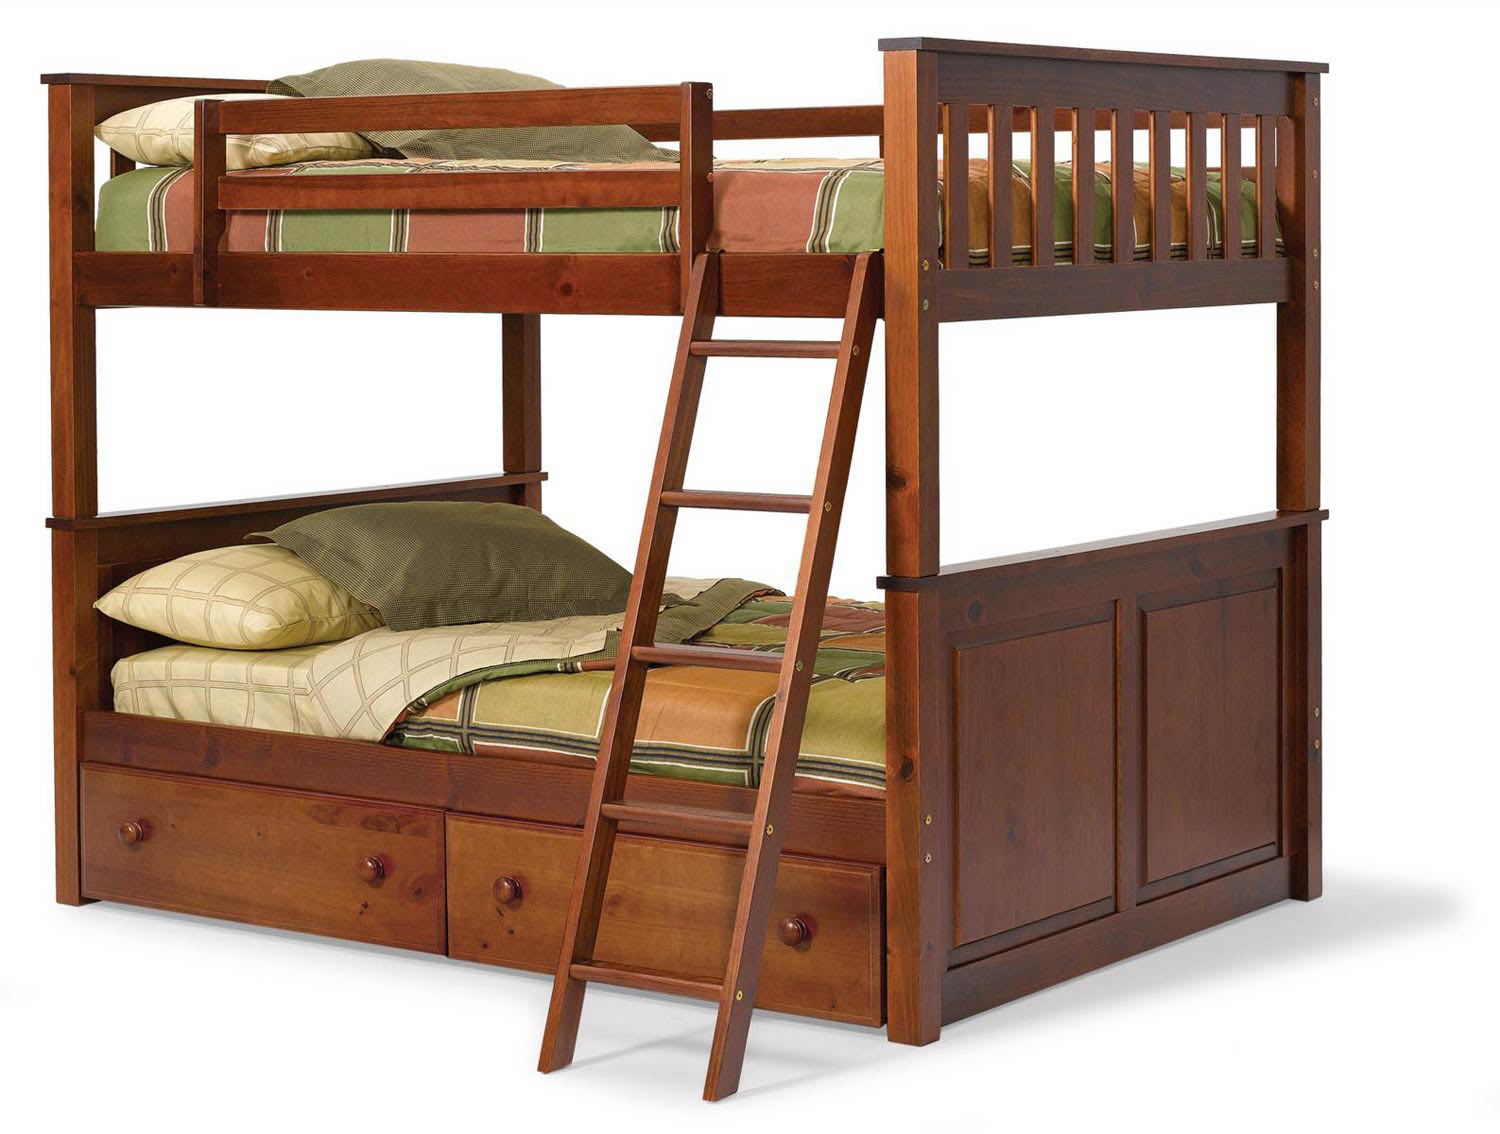 Chelsea Home 3652540-S Full Over Full Mission Panel Bunk Bed with Underbed Storage - Dark